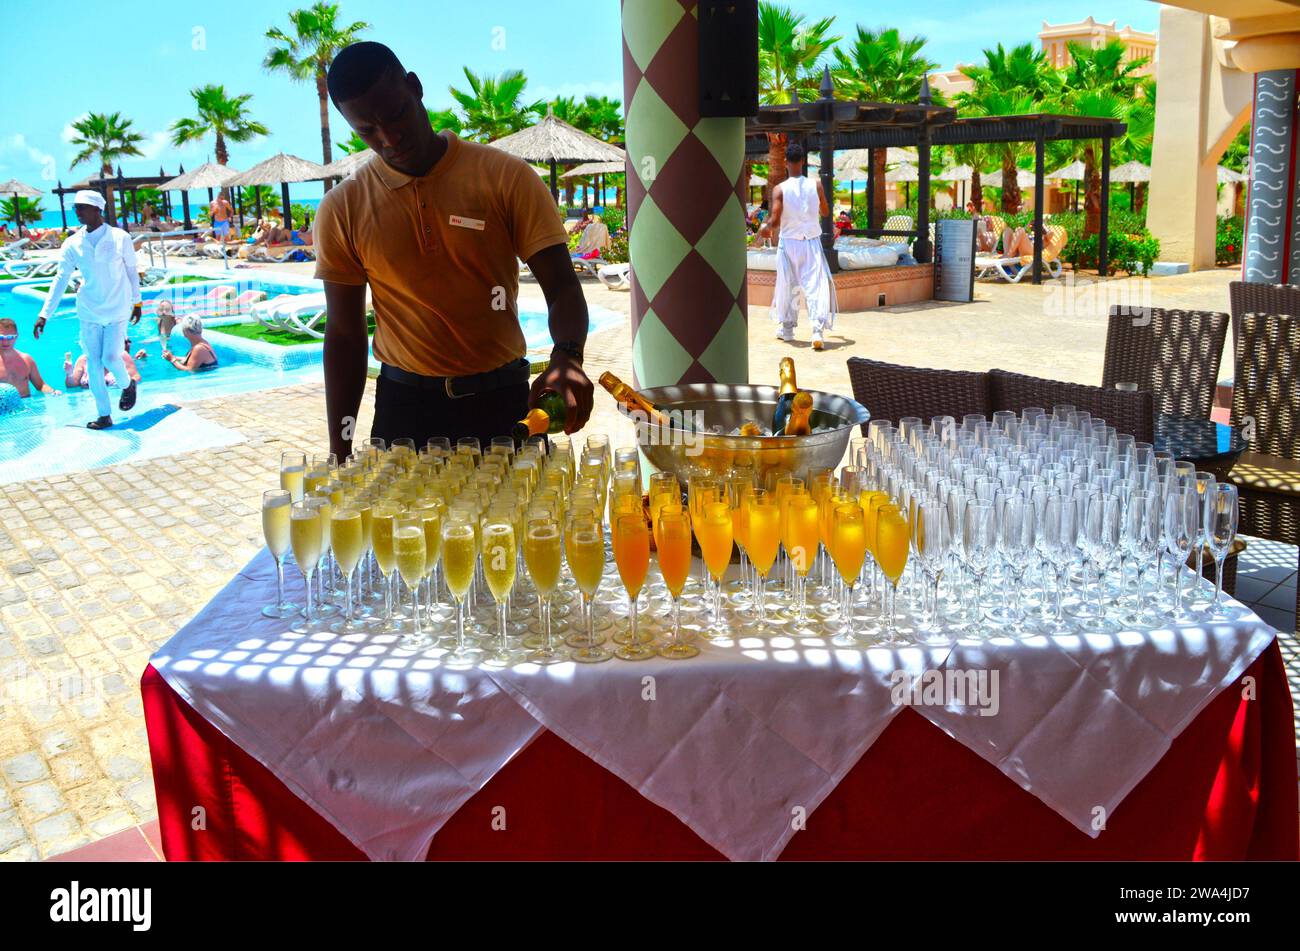 RIU Touareg hotel pouring Prosecco and Bucks fizz wine for the tourists at the bar near the swimming pool Stock Photo